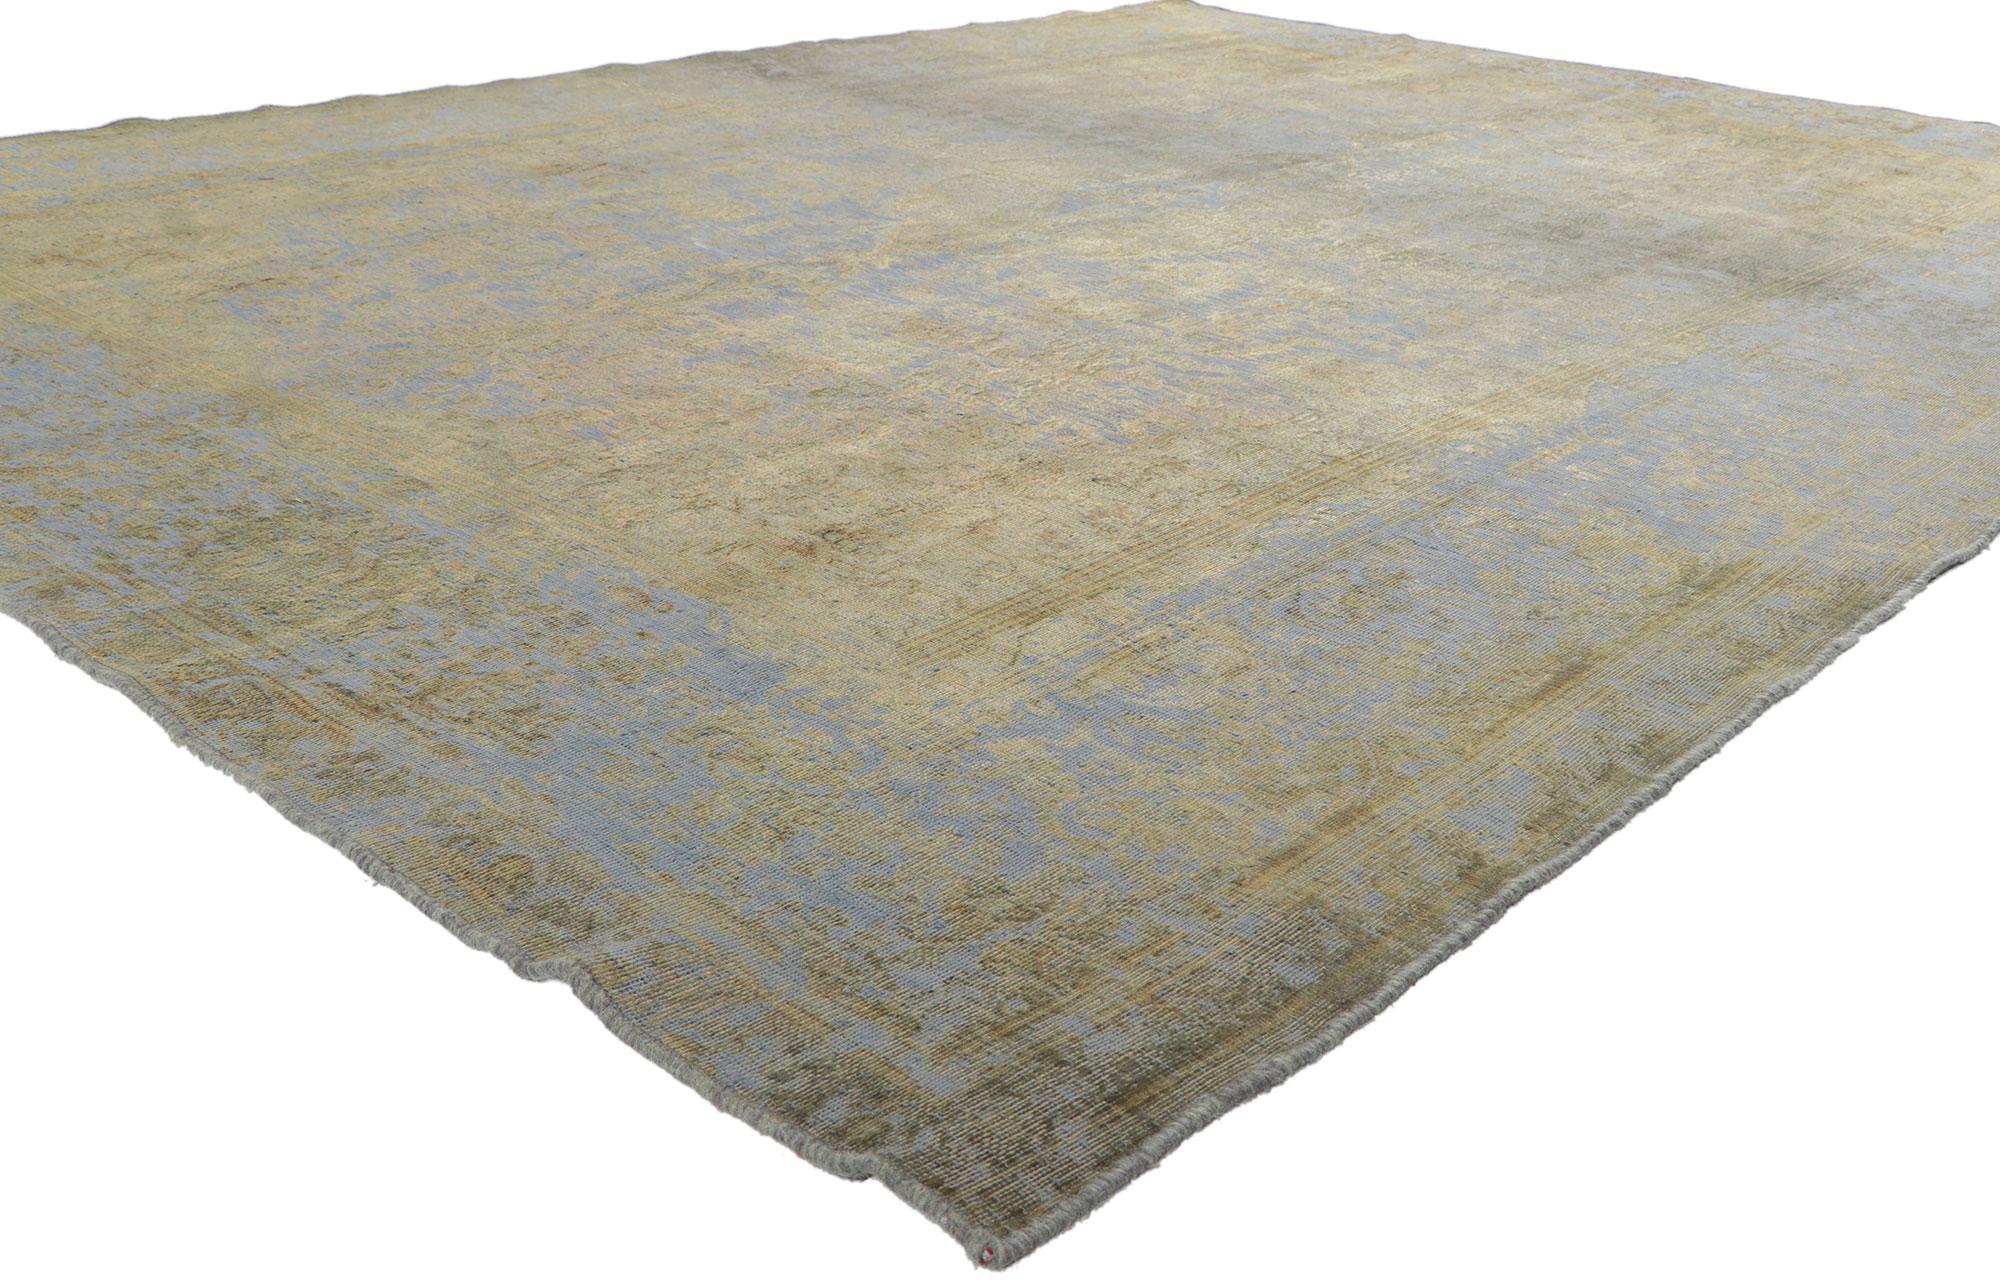 60719 Vintage Turkish Overdyed Rug, 07'10 x 10'05.
Prepare for a design spectacle where Belgian Chic gracefully contends with French Industrial in the captivating world of handmade rugs. This hand-knotted wool vintage Turkish overdyed rug takes